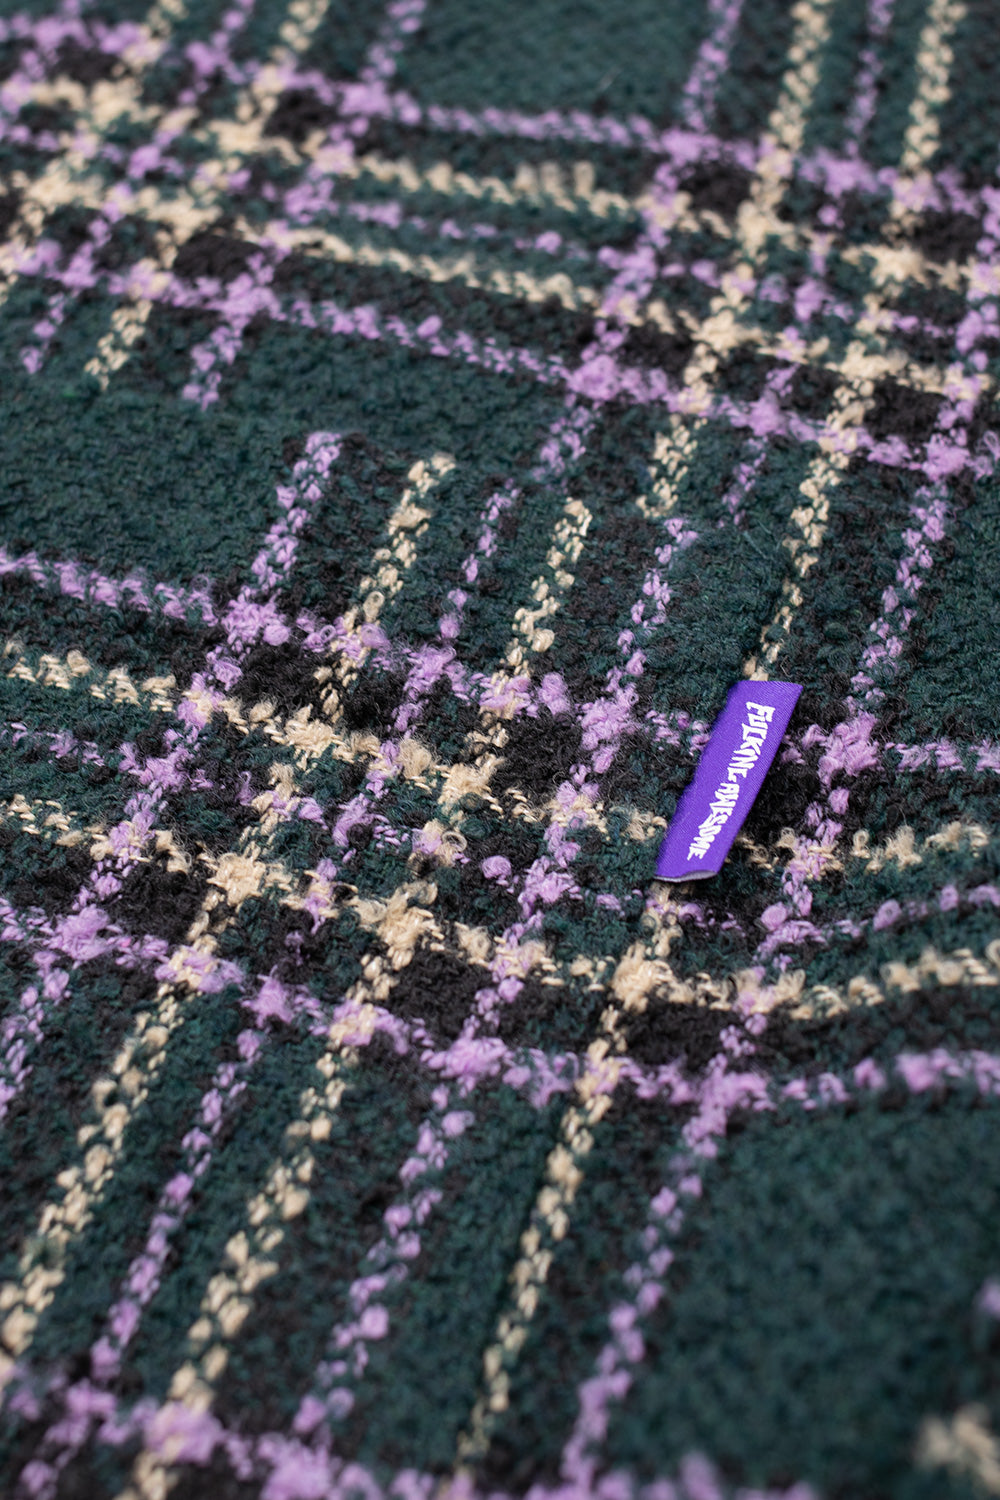 Fucking Awesome Less Heavyweight Oversized Flannel Shirt Green / Purple - BONKERS